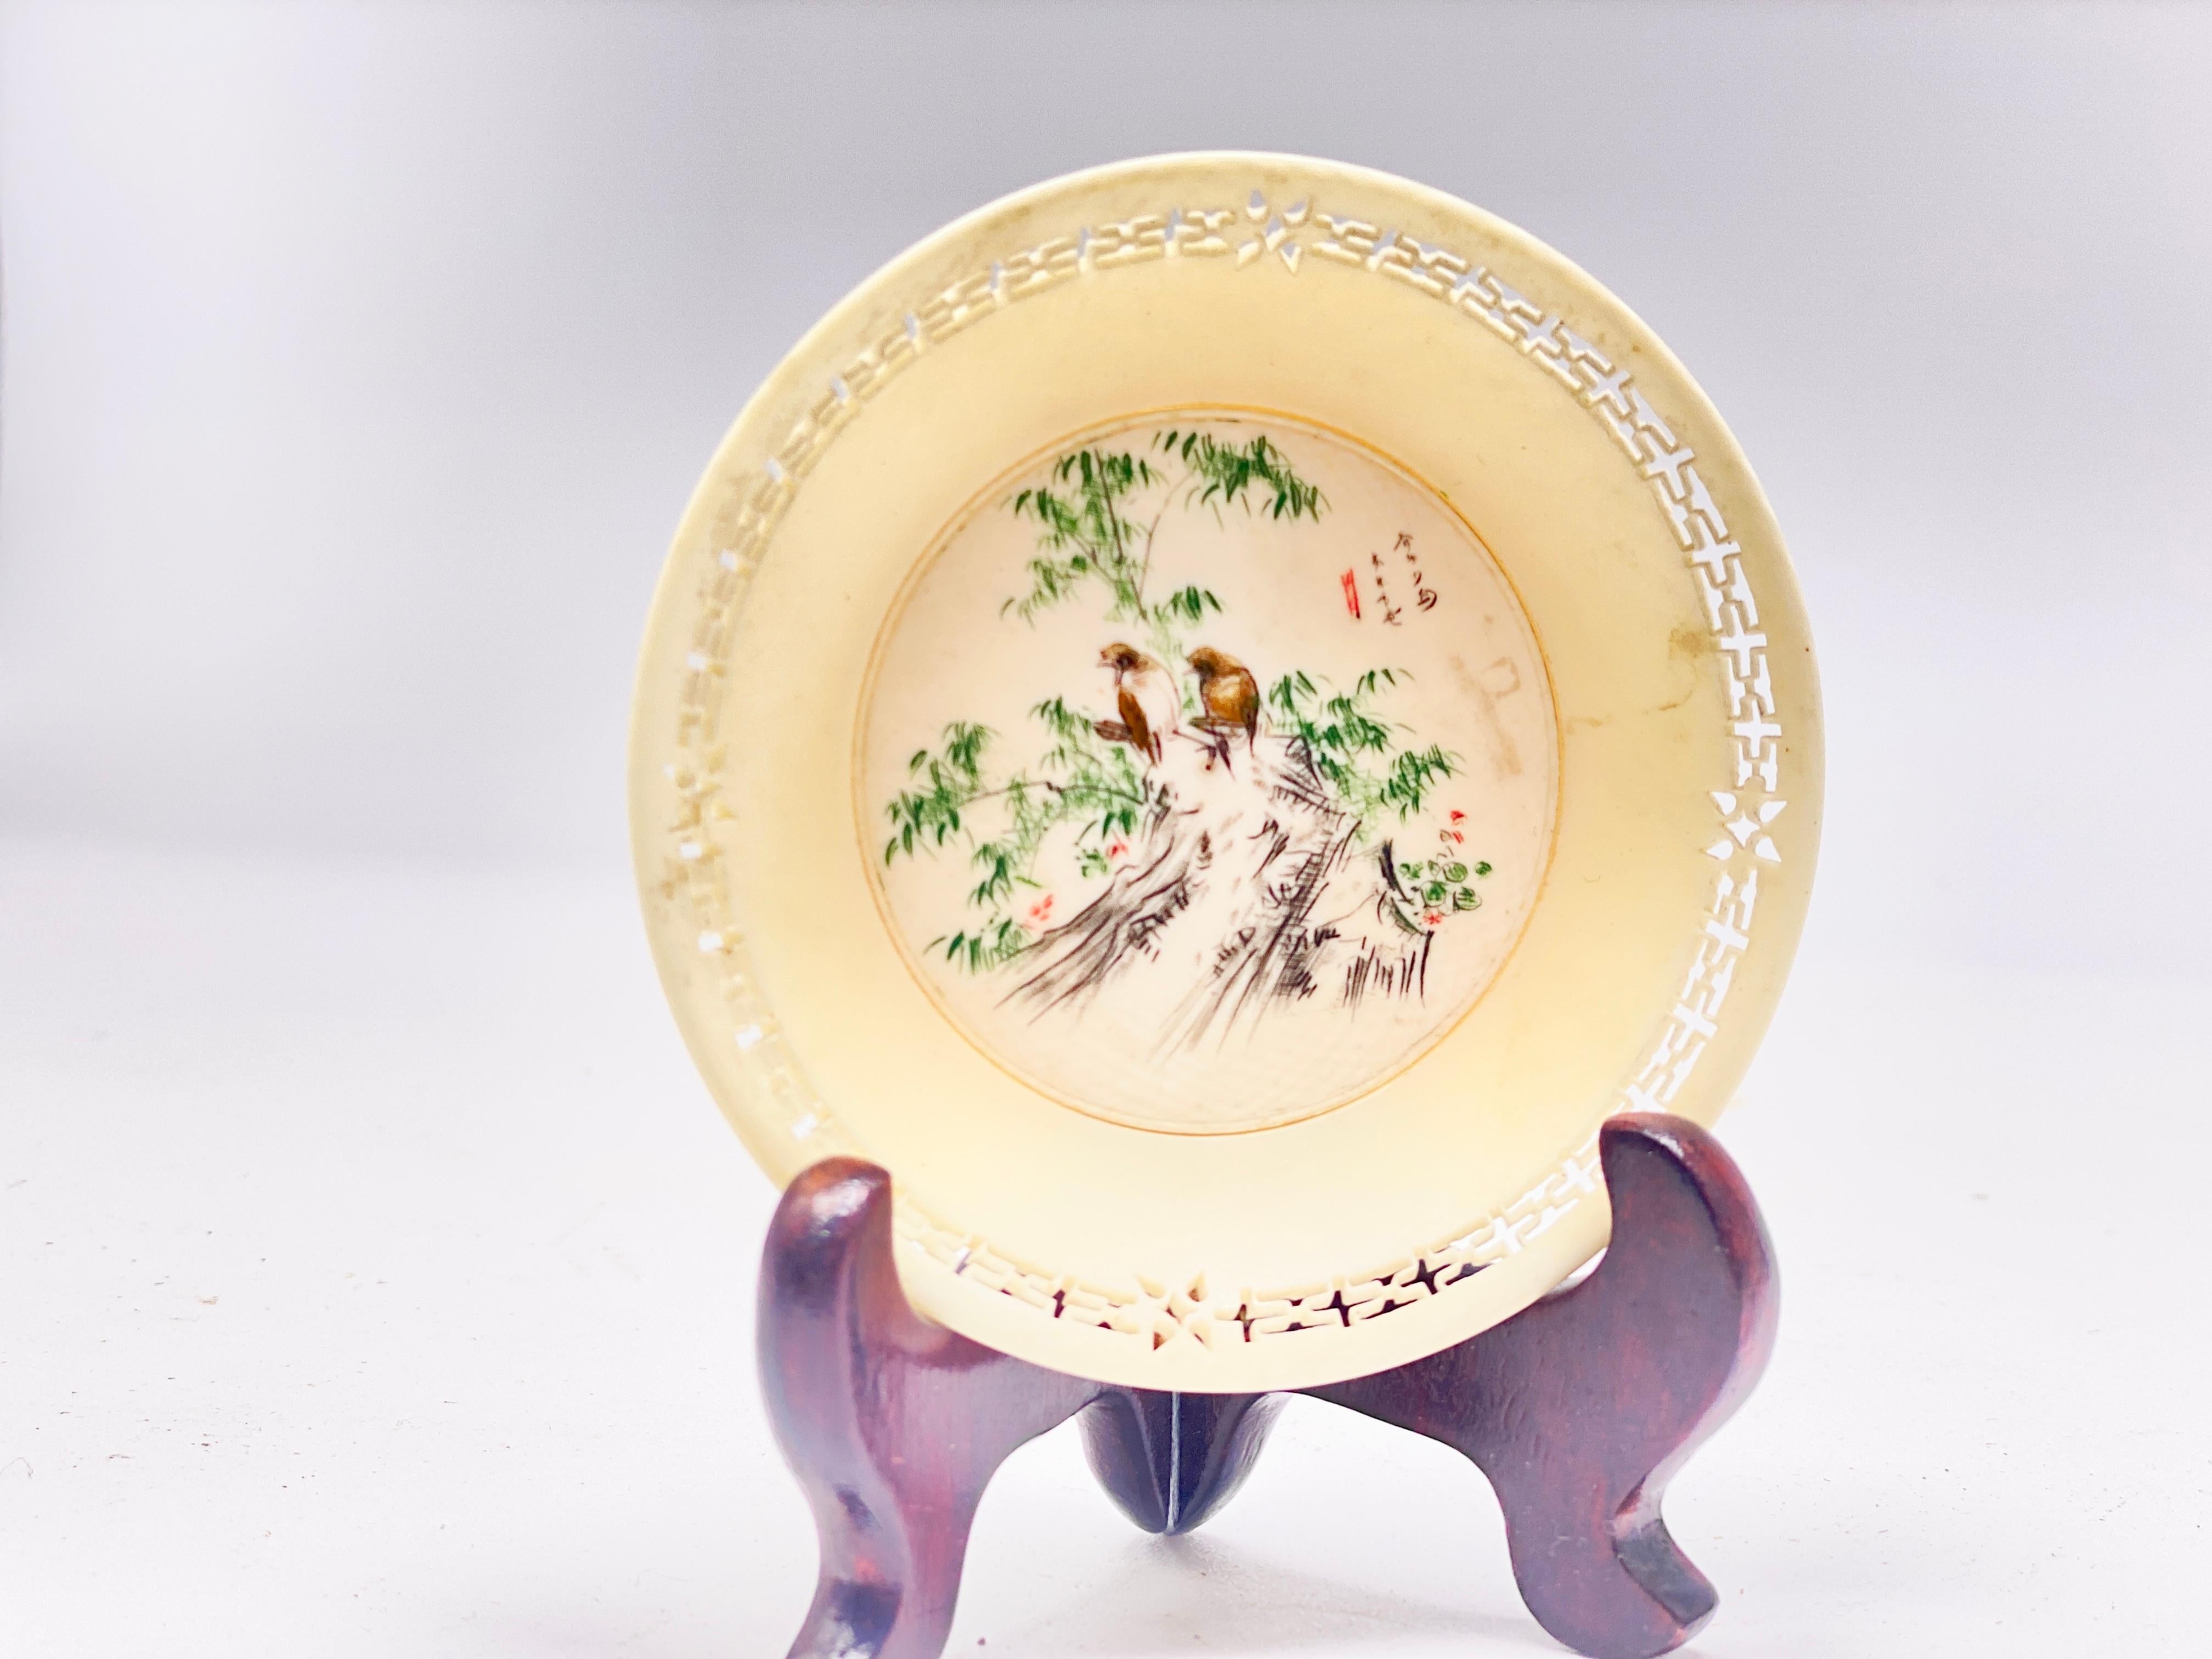 It's a little bone disk, painted. The decor is a decor of birds on branches in green and black color, bone is of course in white color. It is typically an object made in the republic period, in China, at the beginning of the 19th century. These